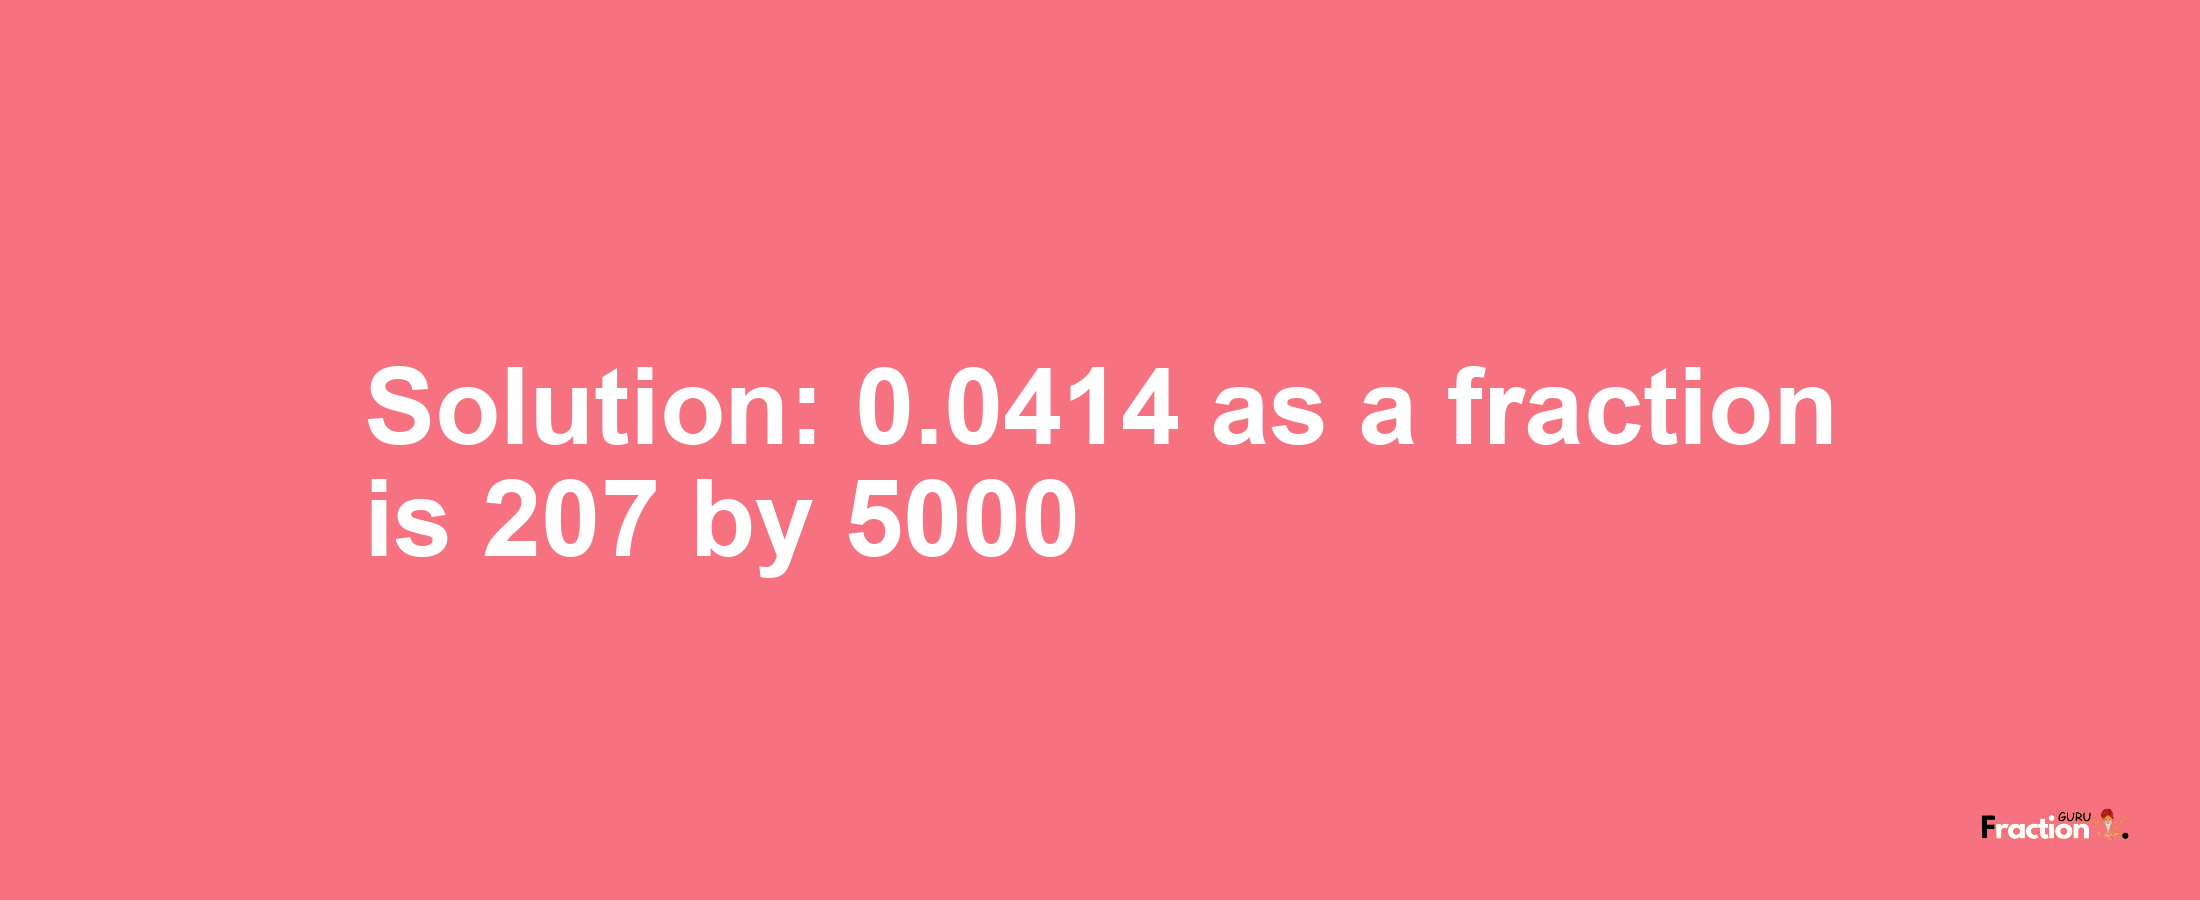 Solution:0.0414 as a fraction is 207/5000